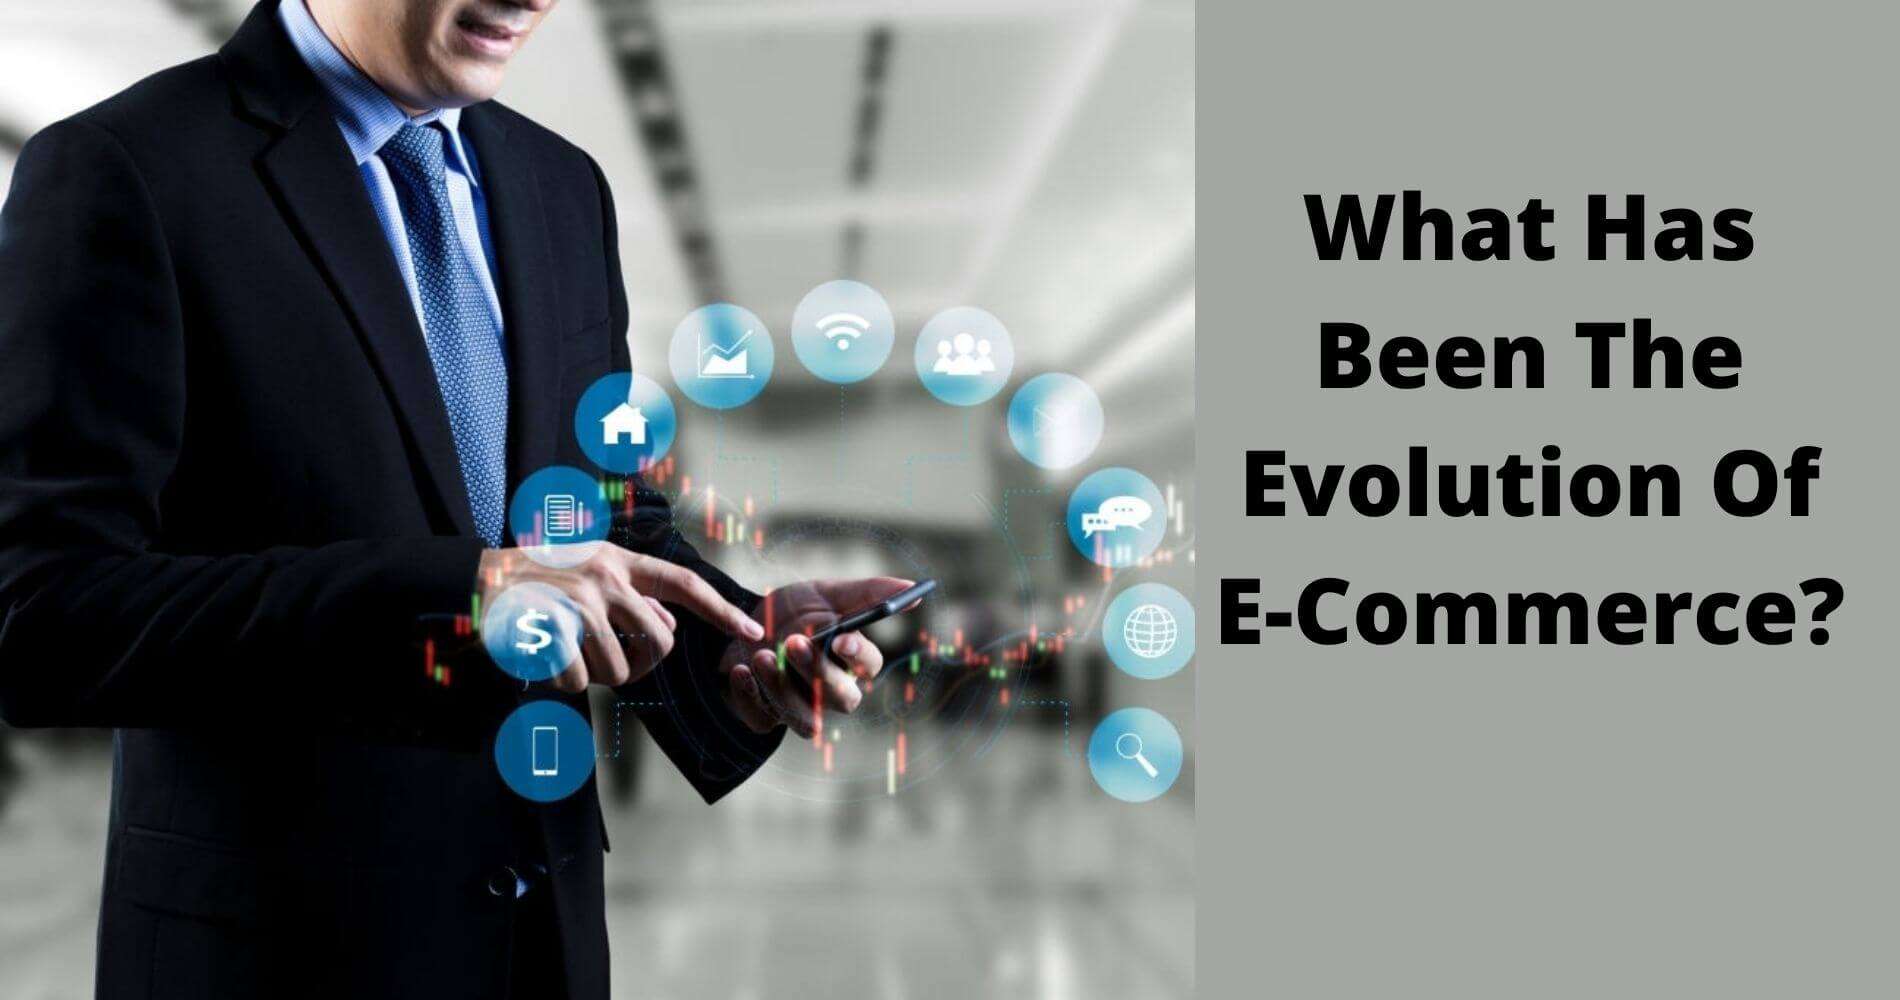 What Has Been The Evolution Of E-Commerce